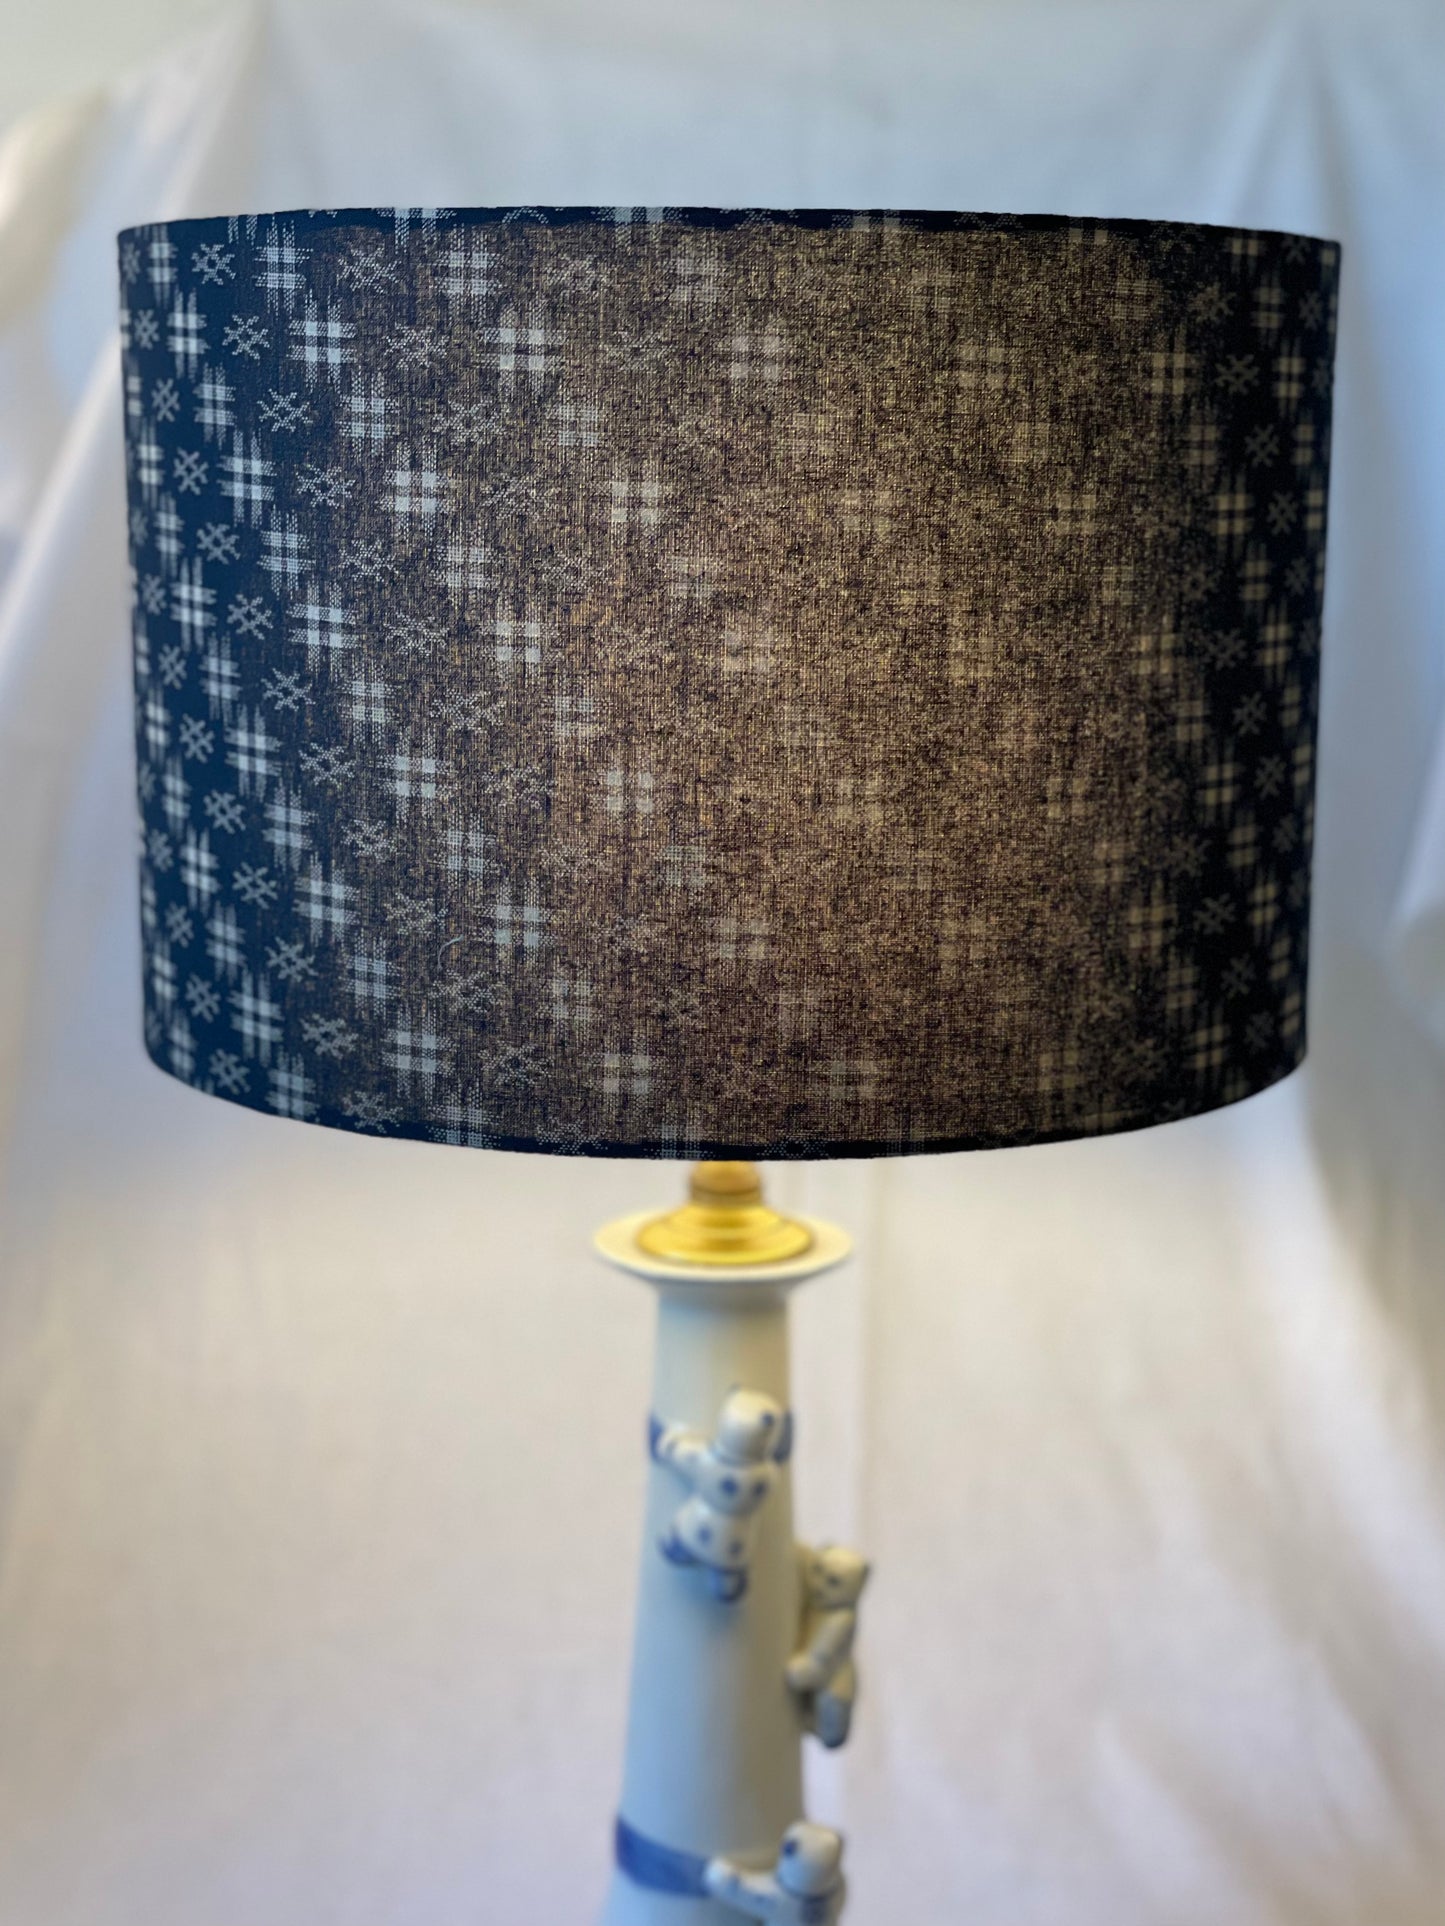 12 Inch Drum Lampshade. Traditional Japanese Design. Navy Blue with Ecru Hashtag Motif.